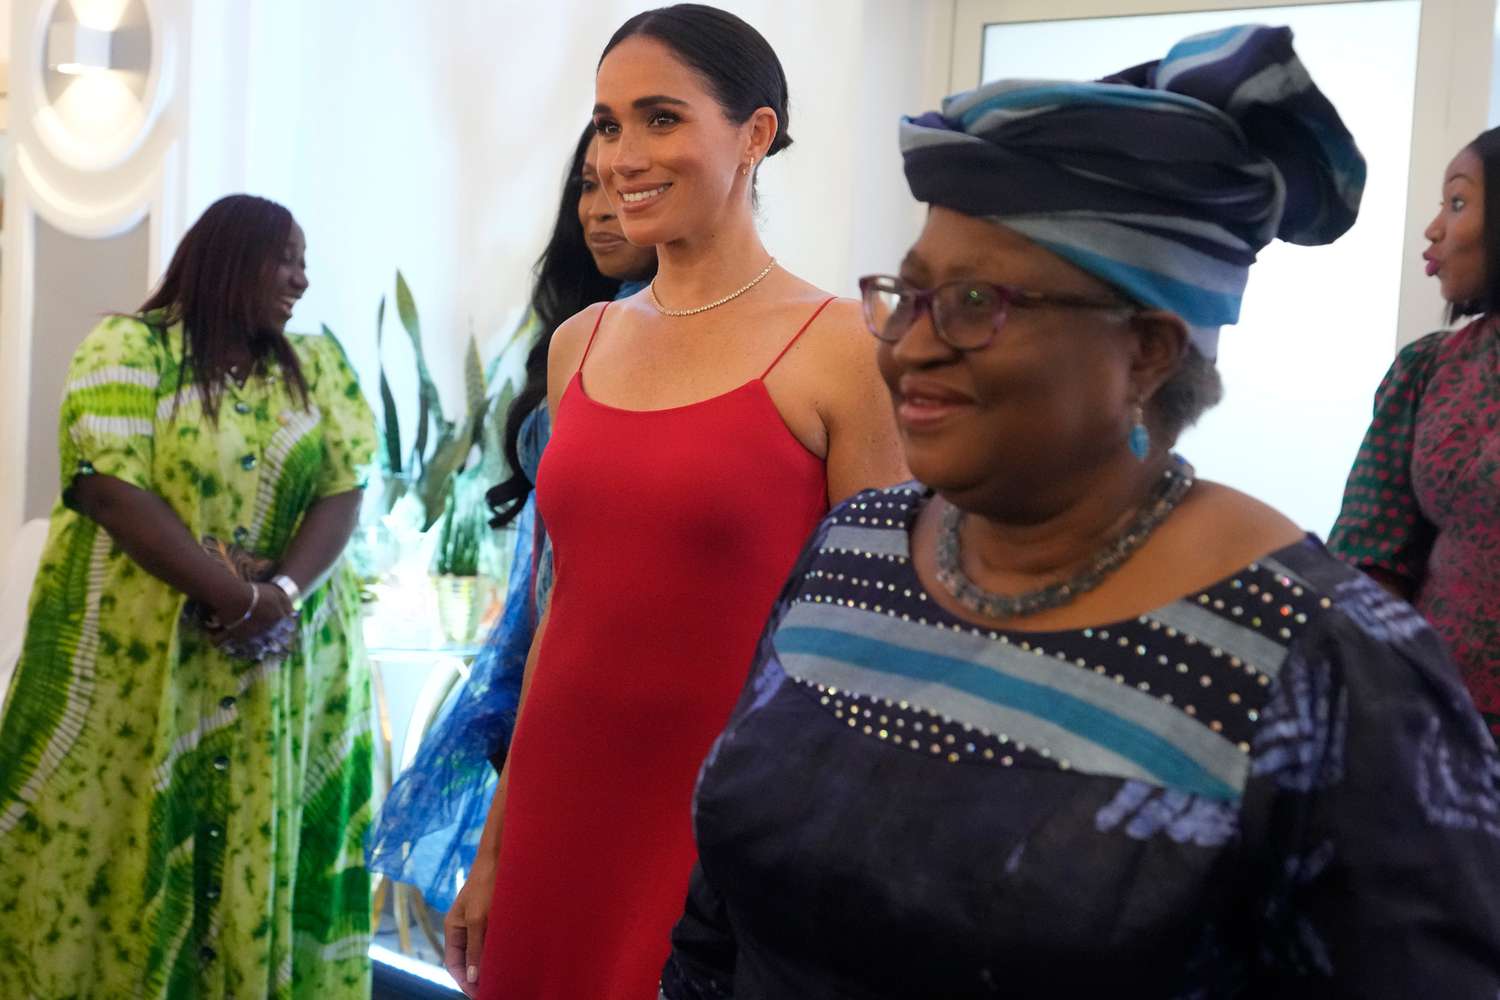 Meghan Markle ‘Brings Inspiration,’ Says WTO Director-General [Video]